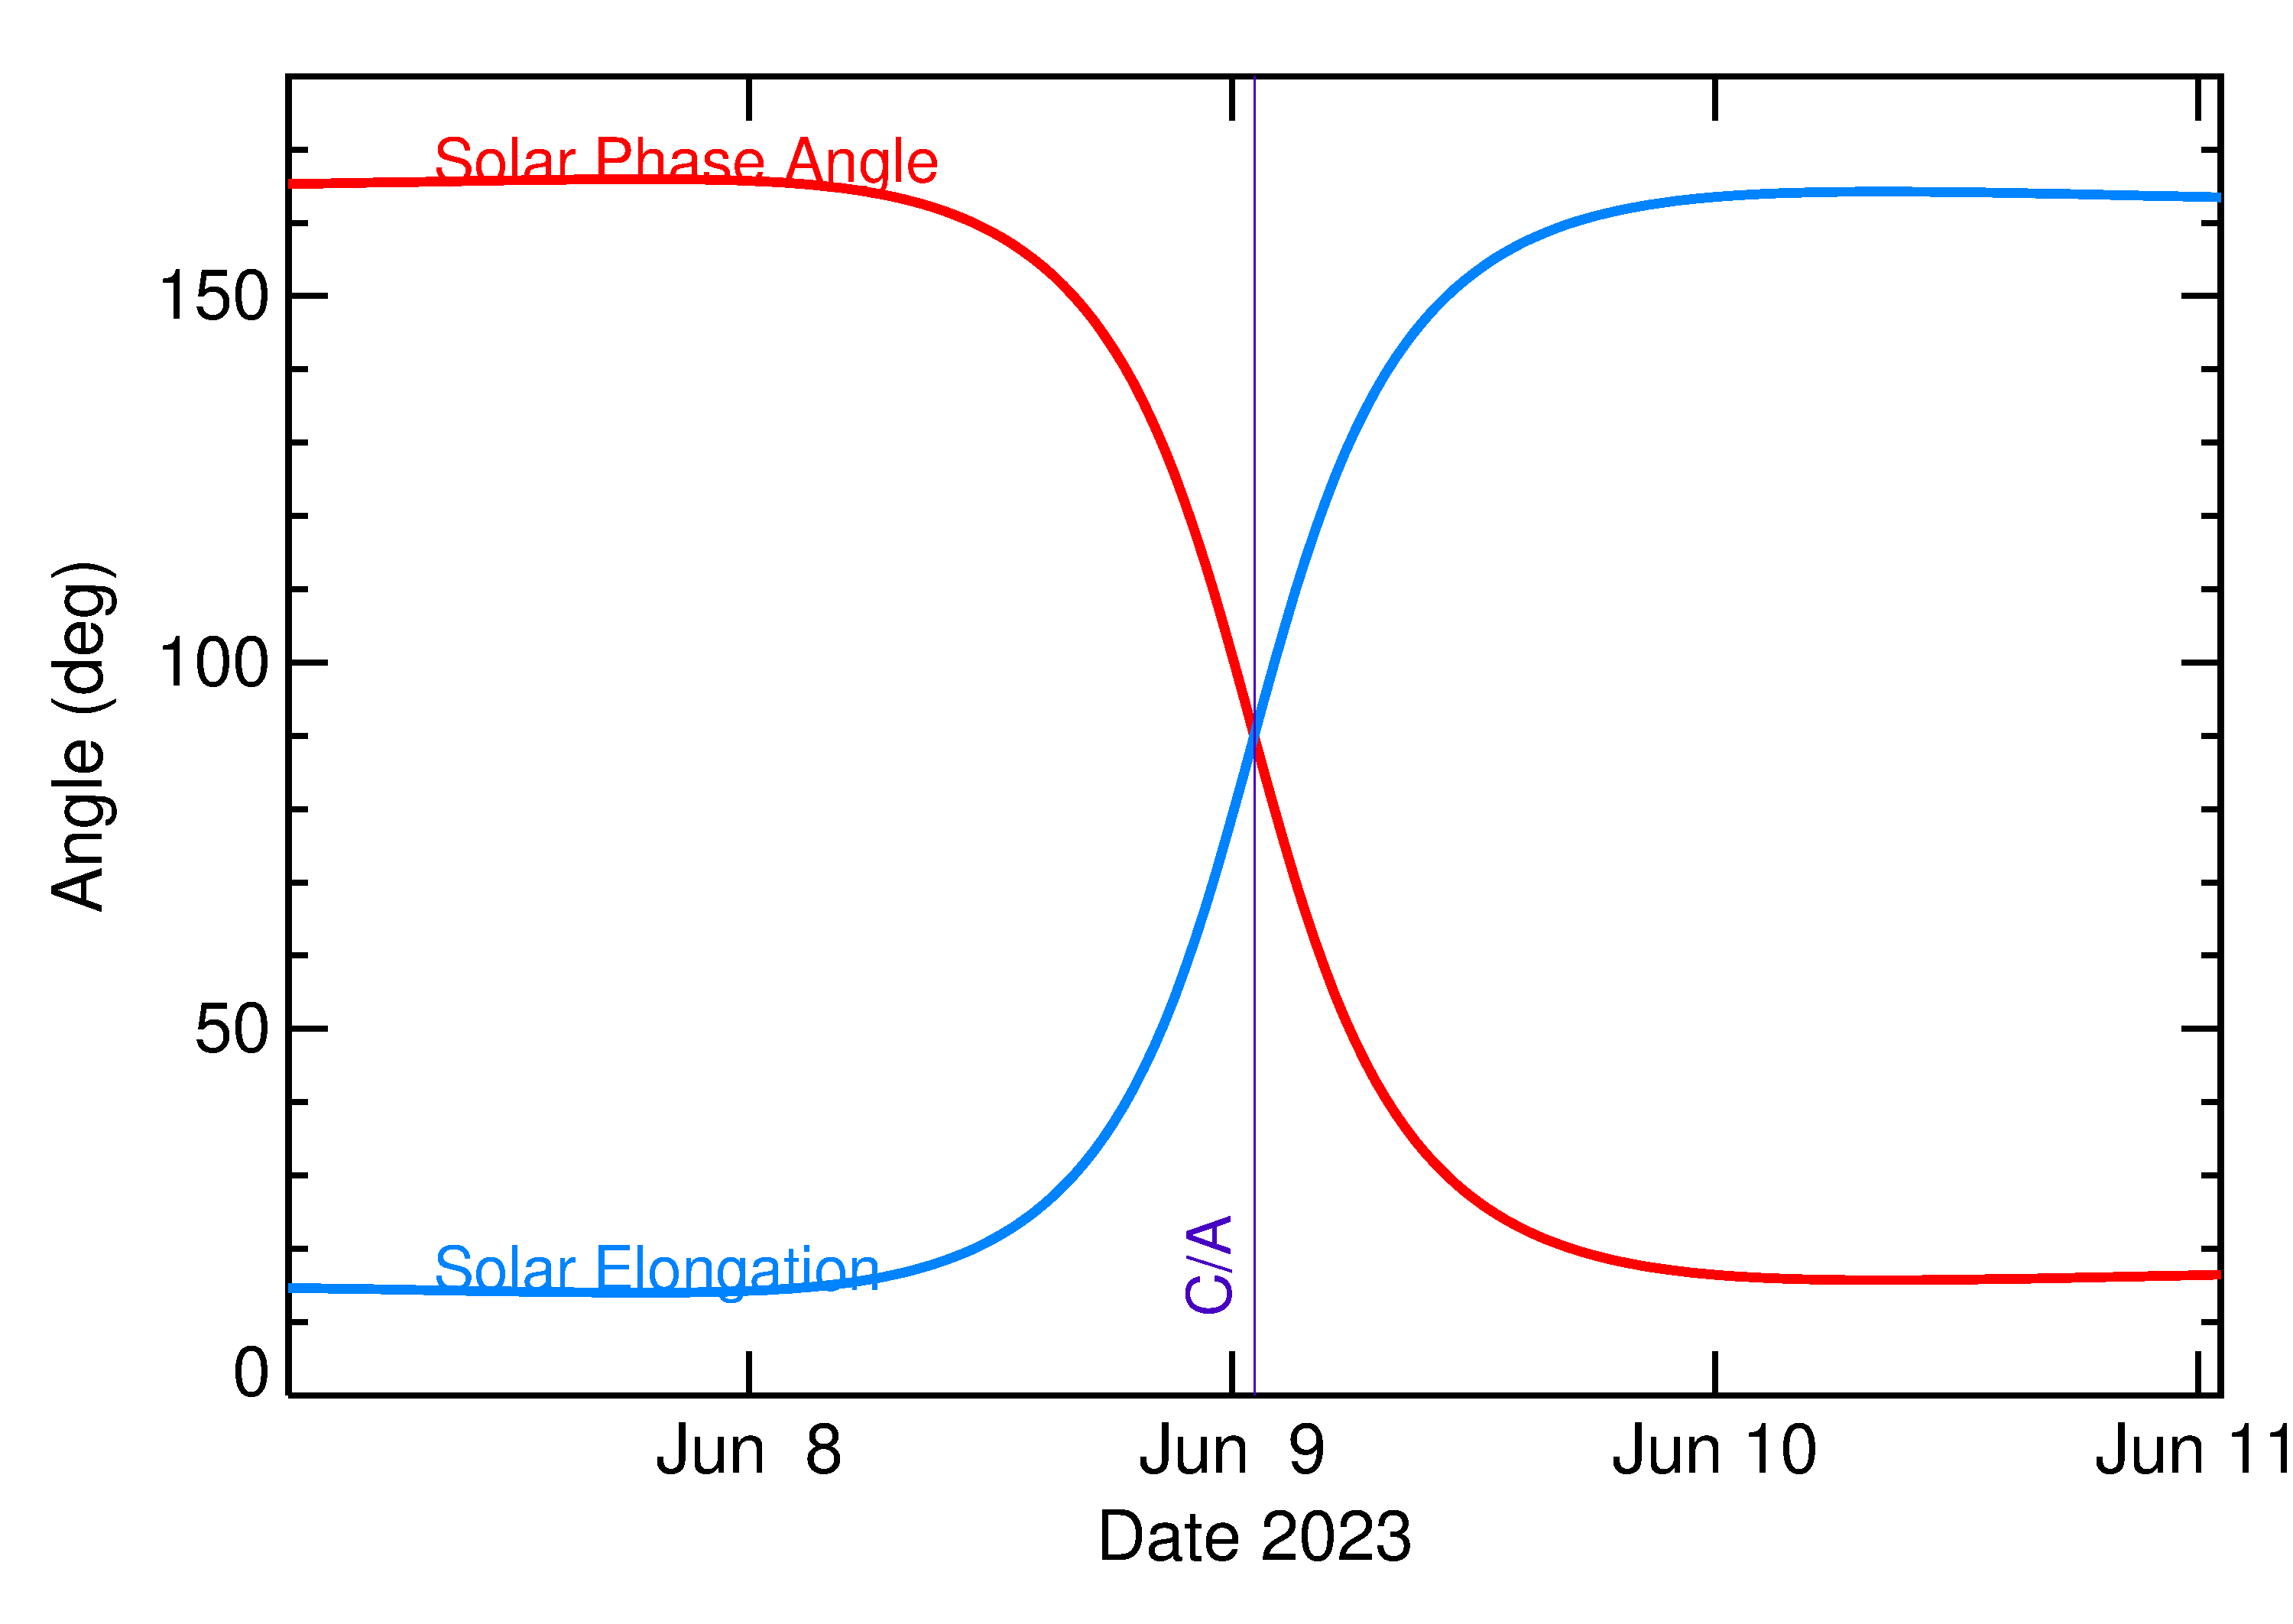 Solar Elongation and Solar Phase Angle of 2023 LS in the days around closest approach